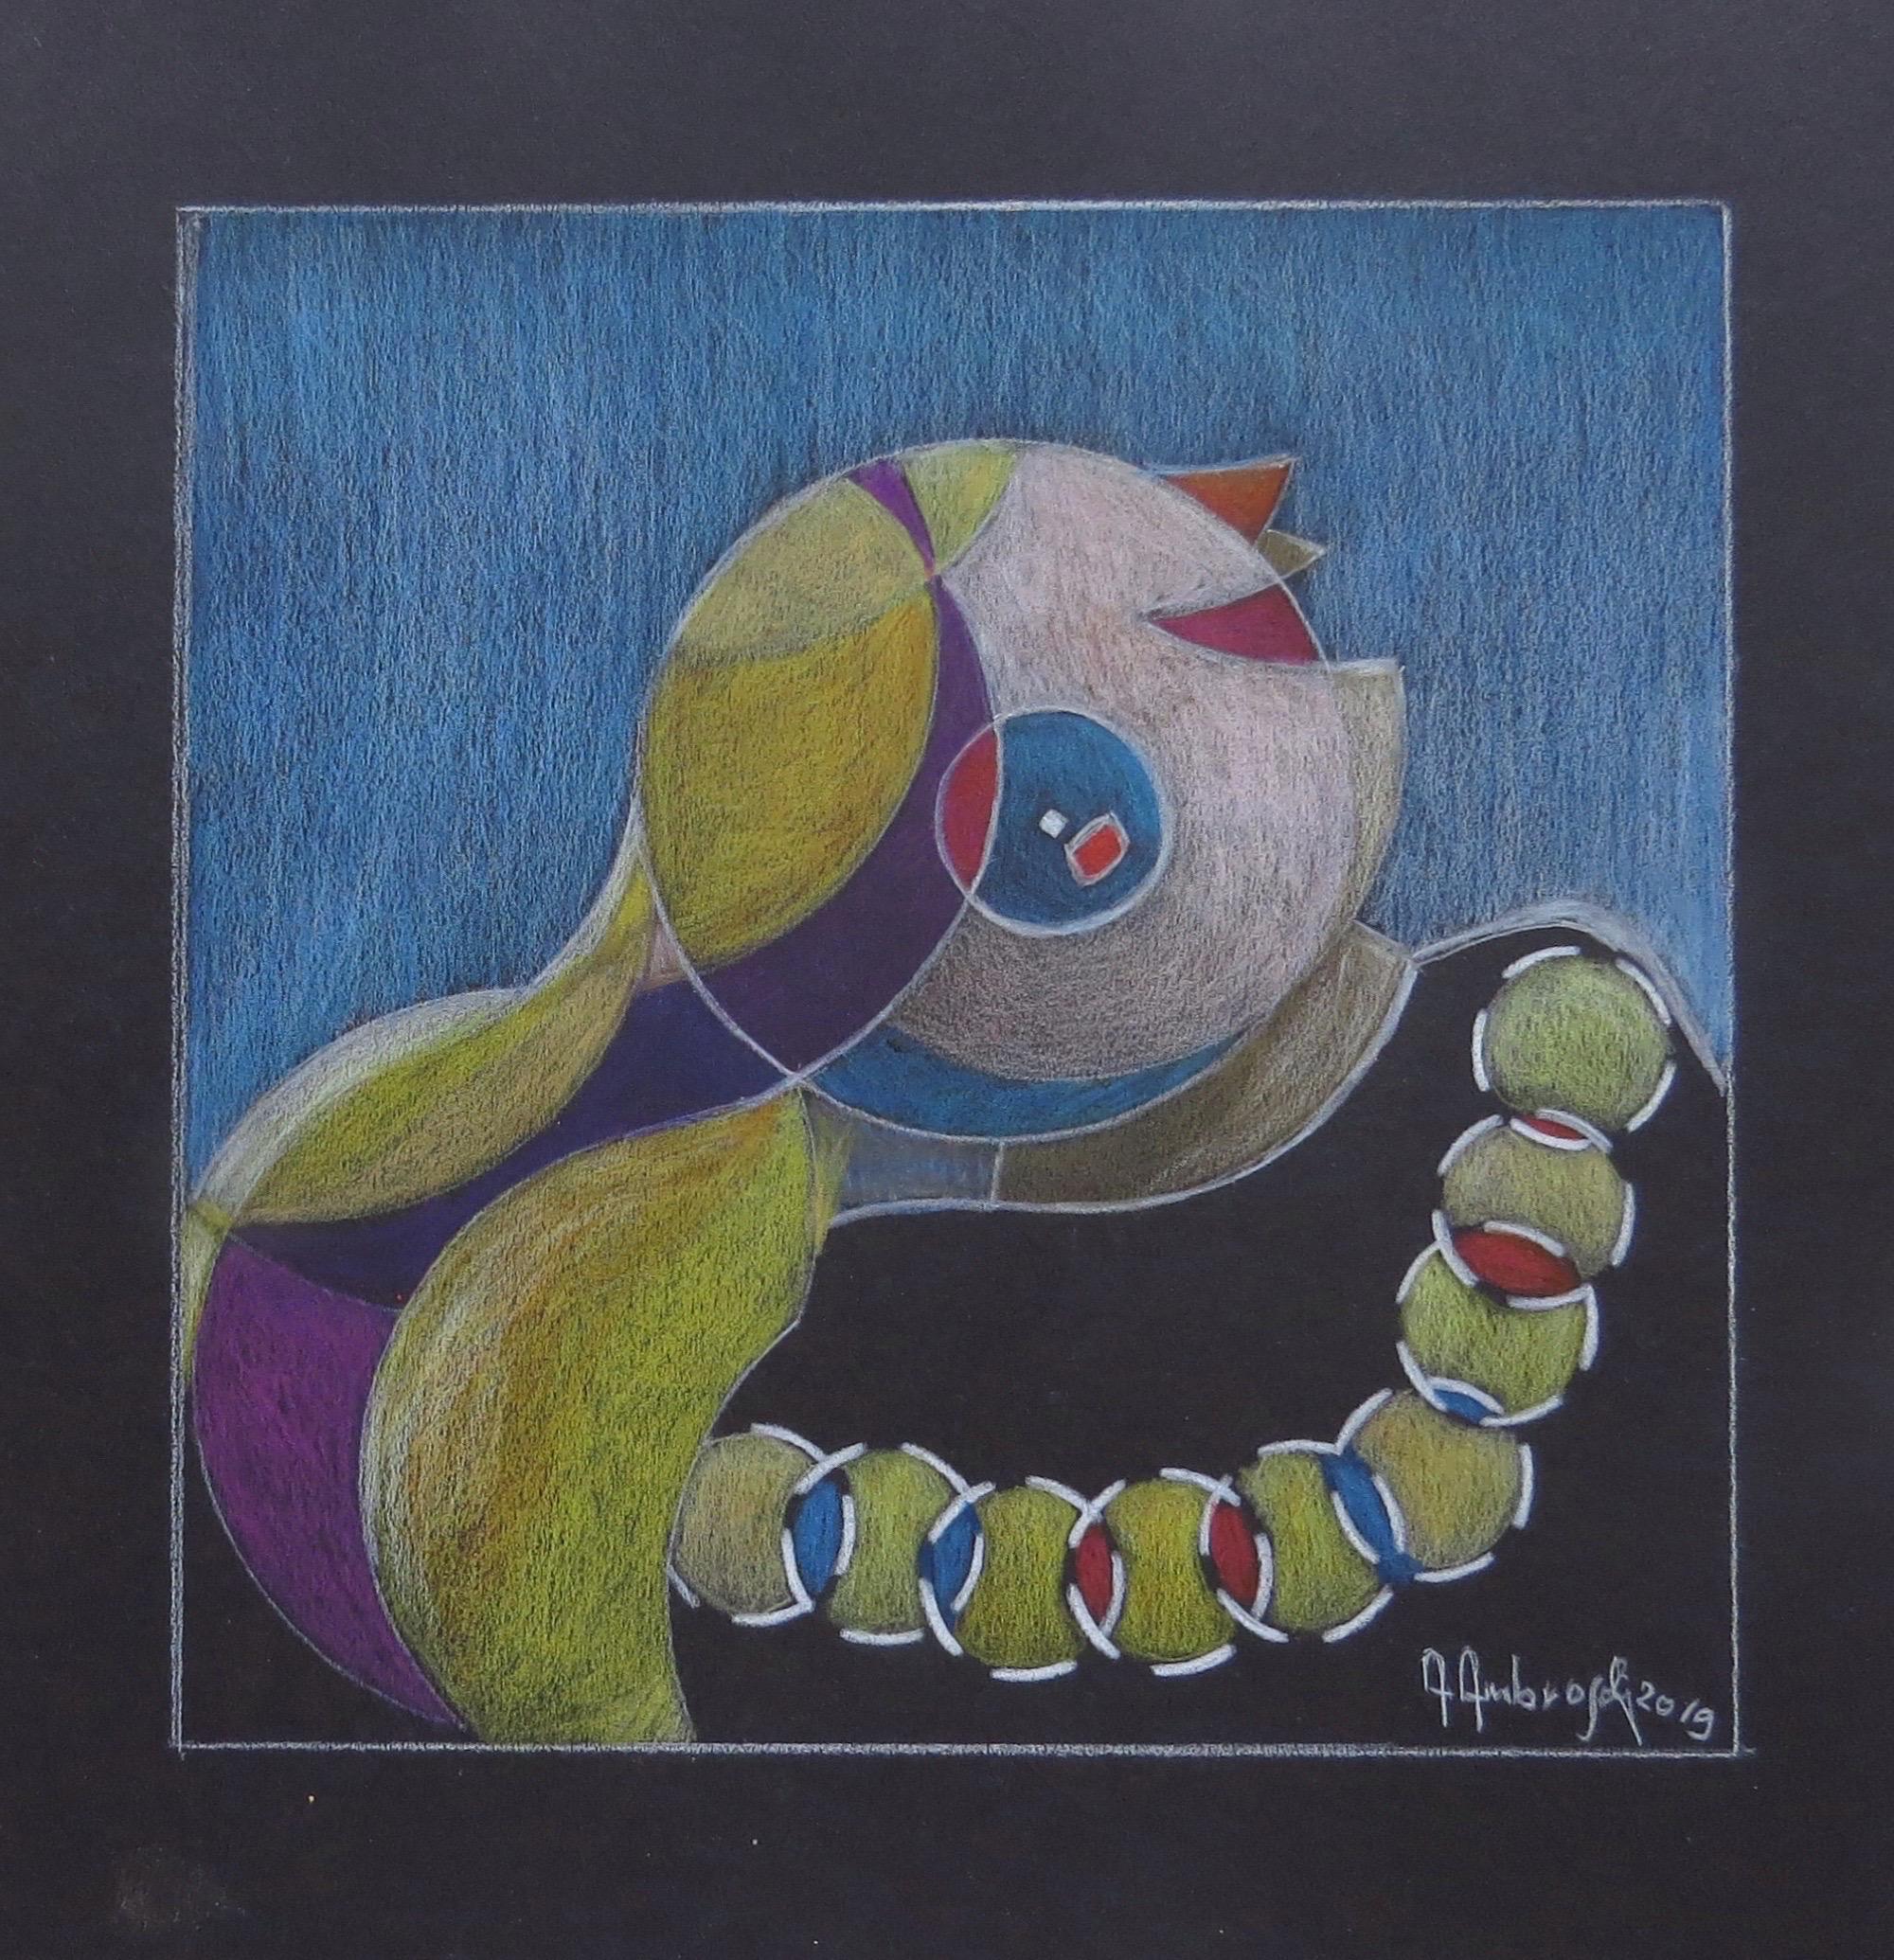 Brightness (2019) cm 21x21, by Italian artist Annemarie Ambrosoli, is a colored drawing with color pencil on a black cardboard, that measures 29x27 cm.
This work is a one-of-a-kind piece. It is unframed. Hand-signed by the artist in the lower right